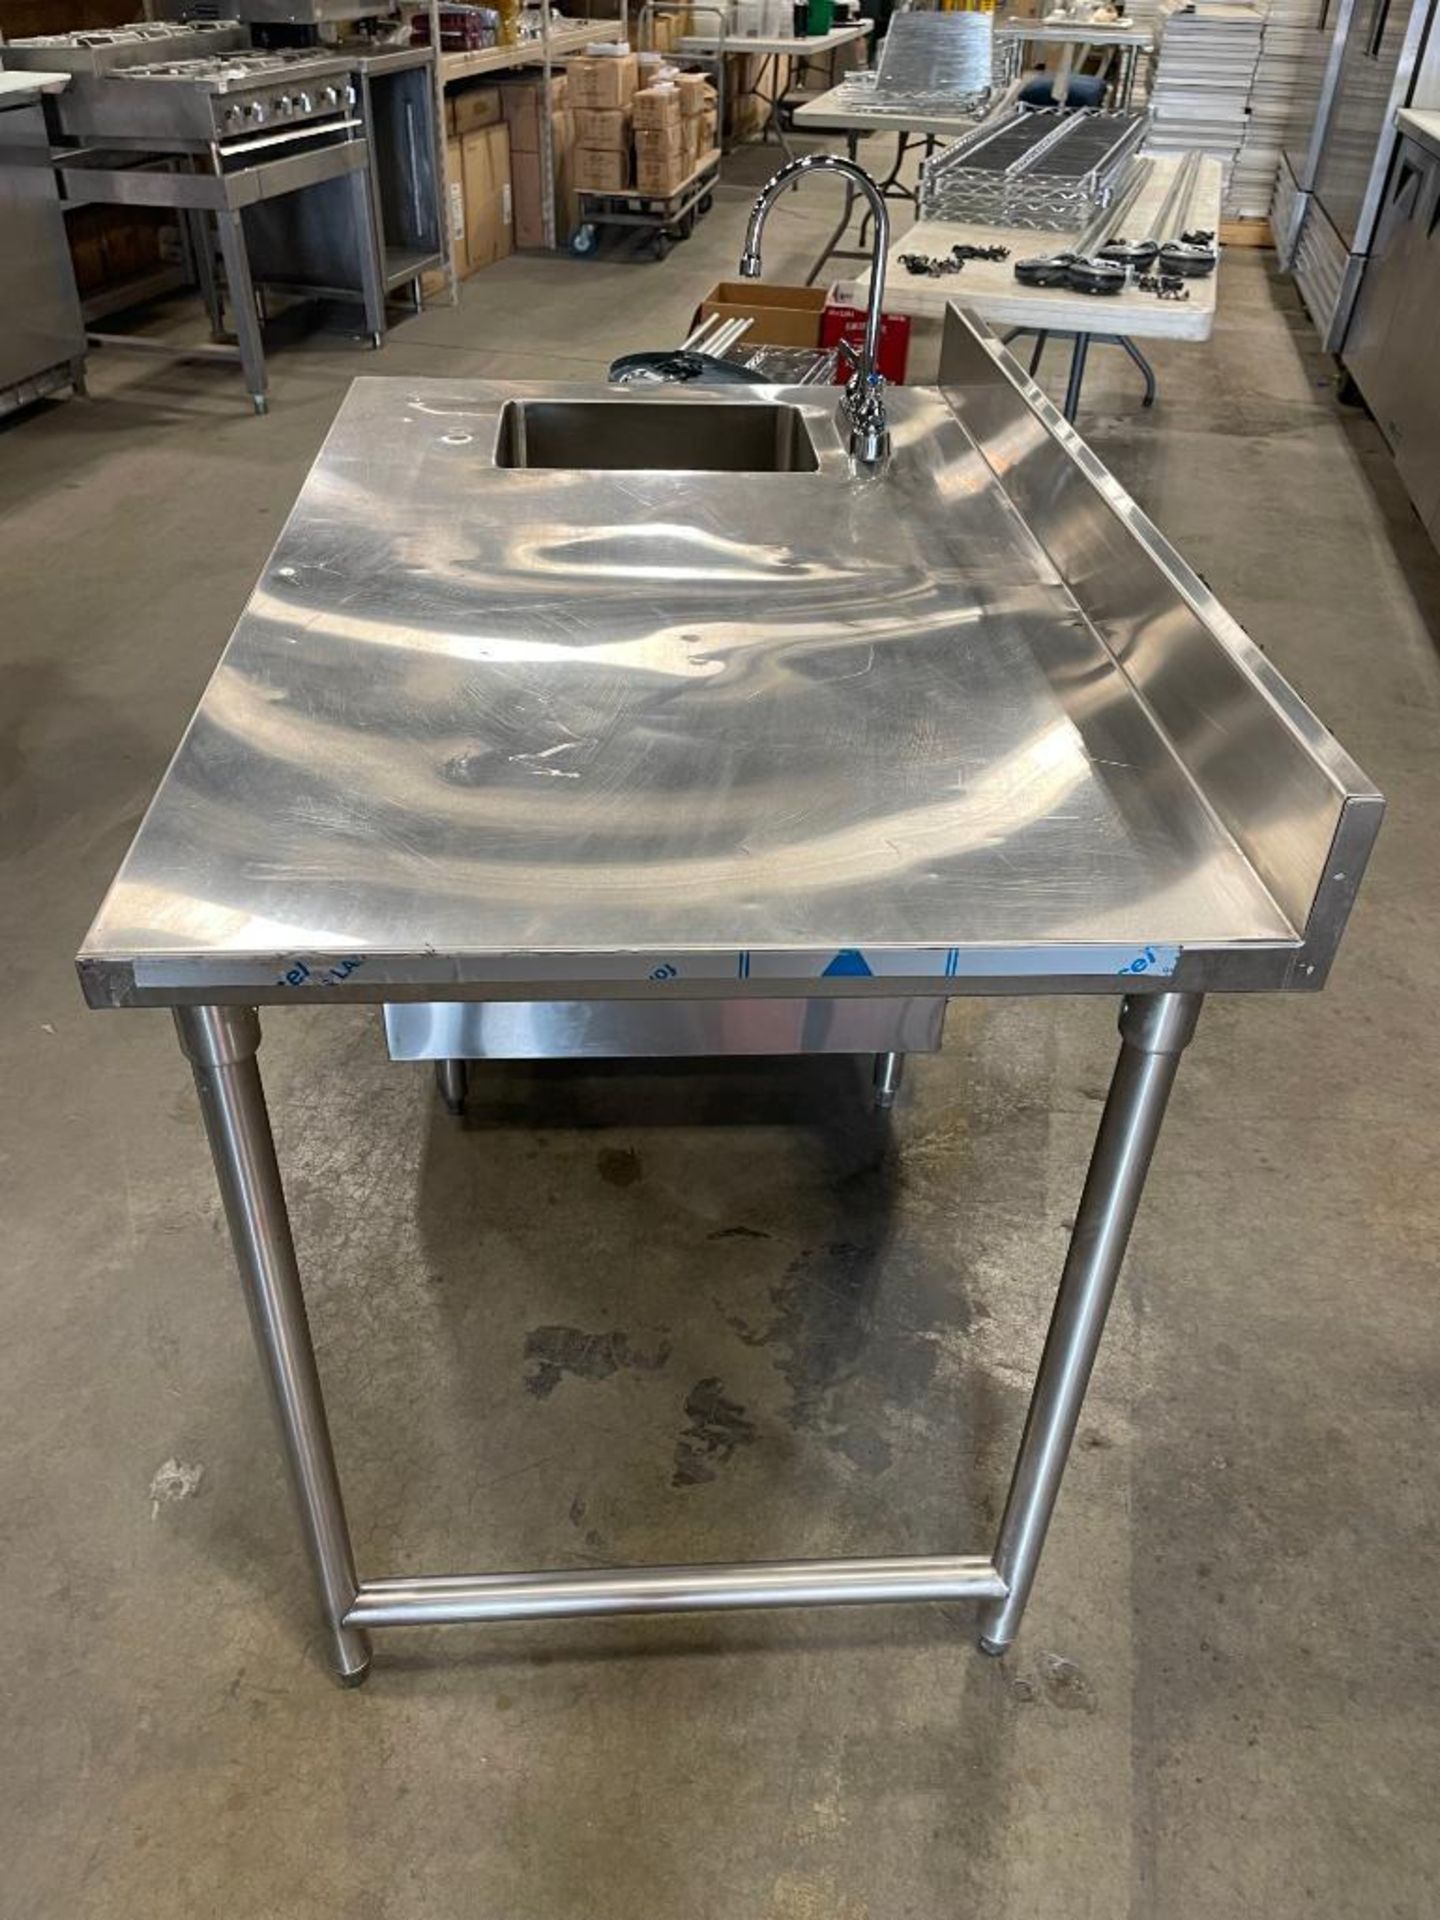 48" STAINLESS STEEL WORK TABLE WITH SINGLE WELL SINK - Image 5 of 11